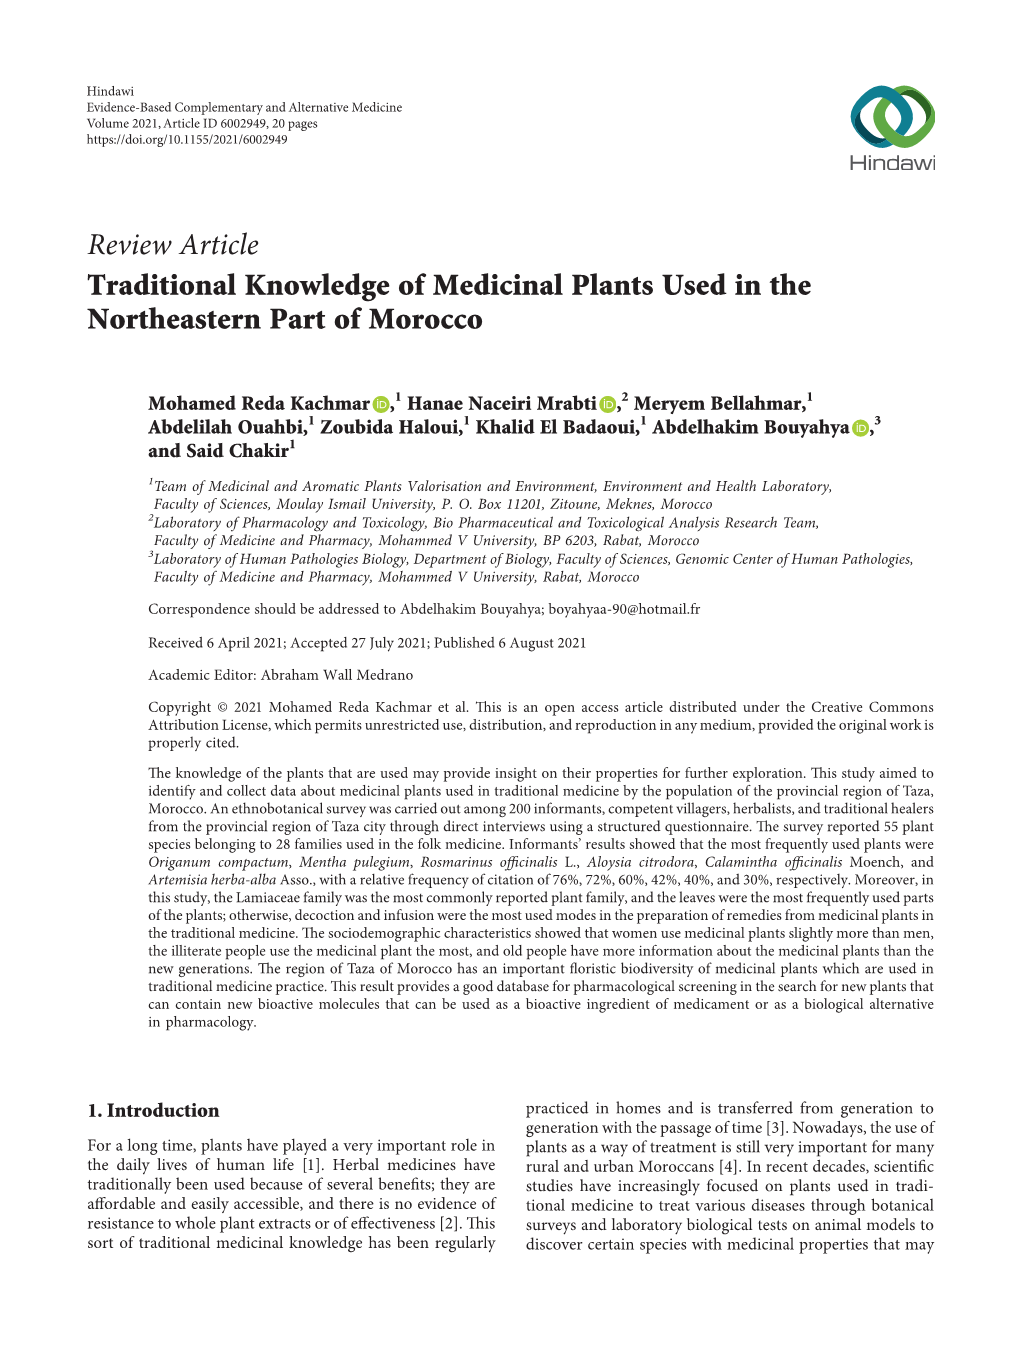 Review Article Traditional Knowledge of Medicinal Plants Used in the Northeastern Part of Morocco